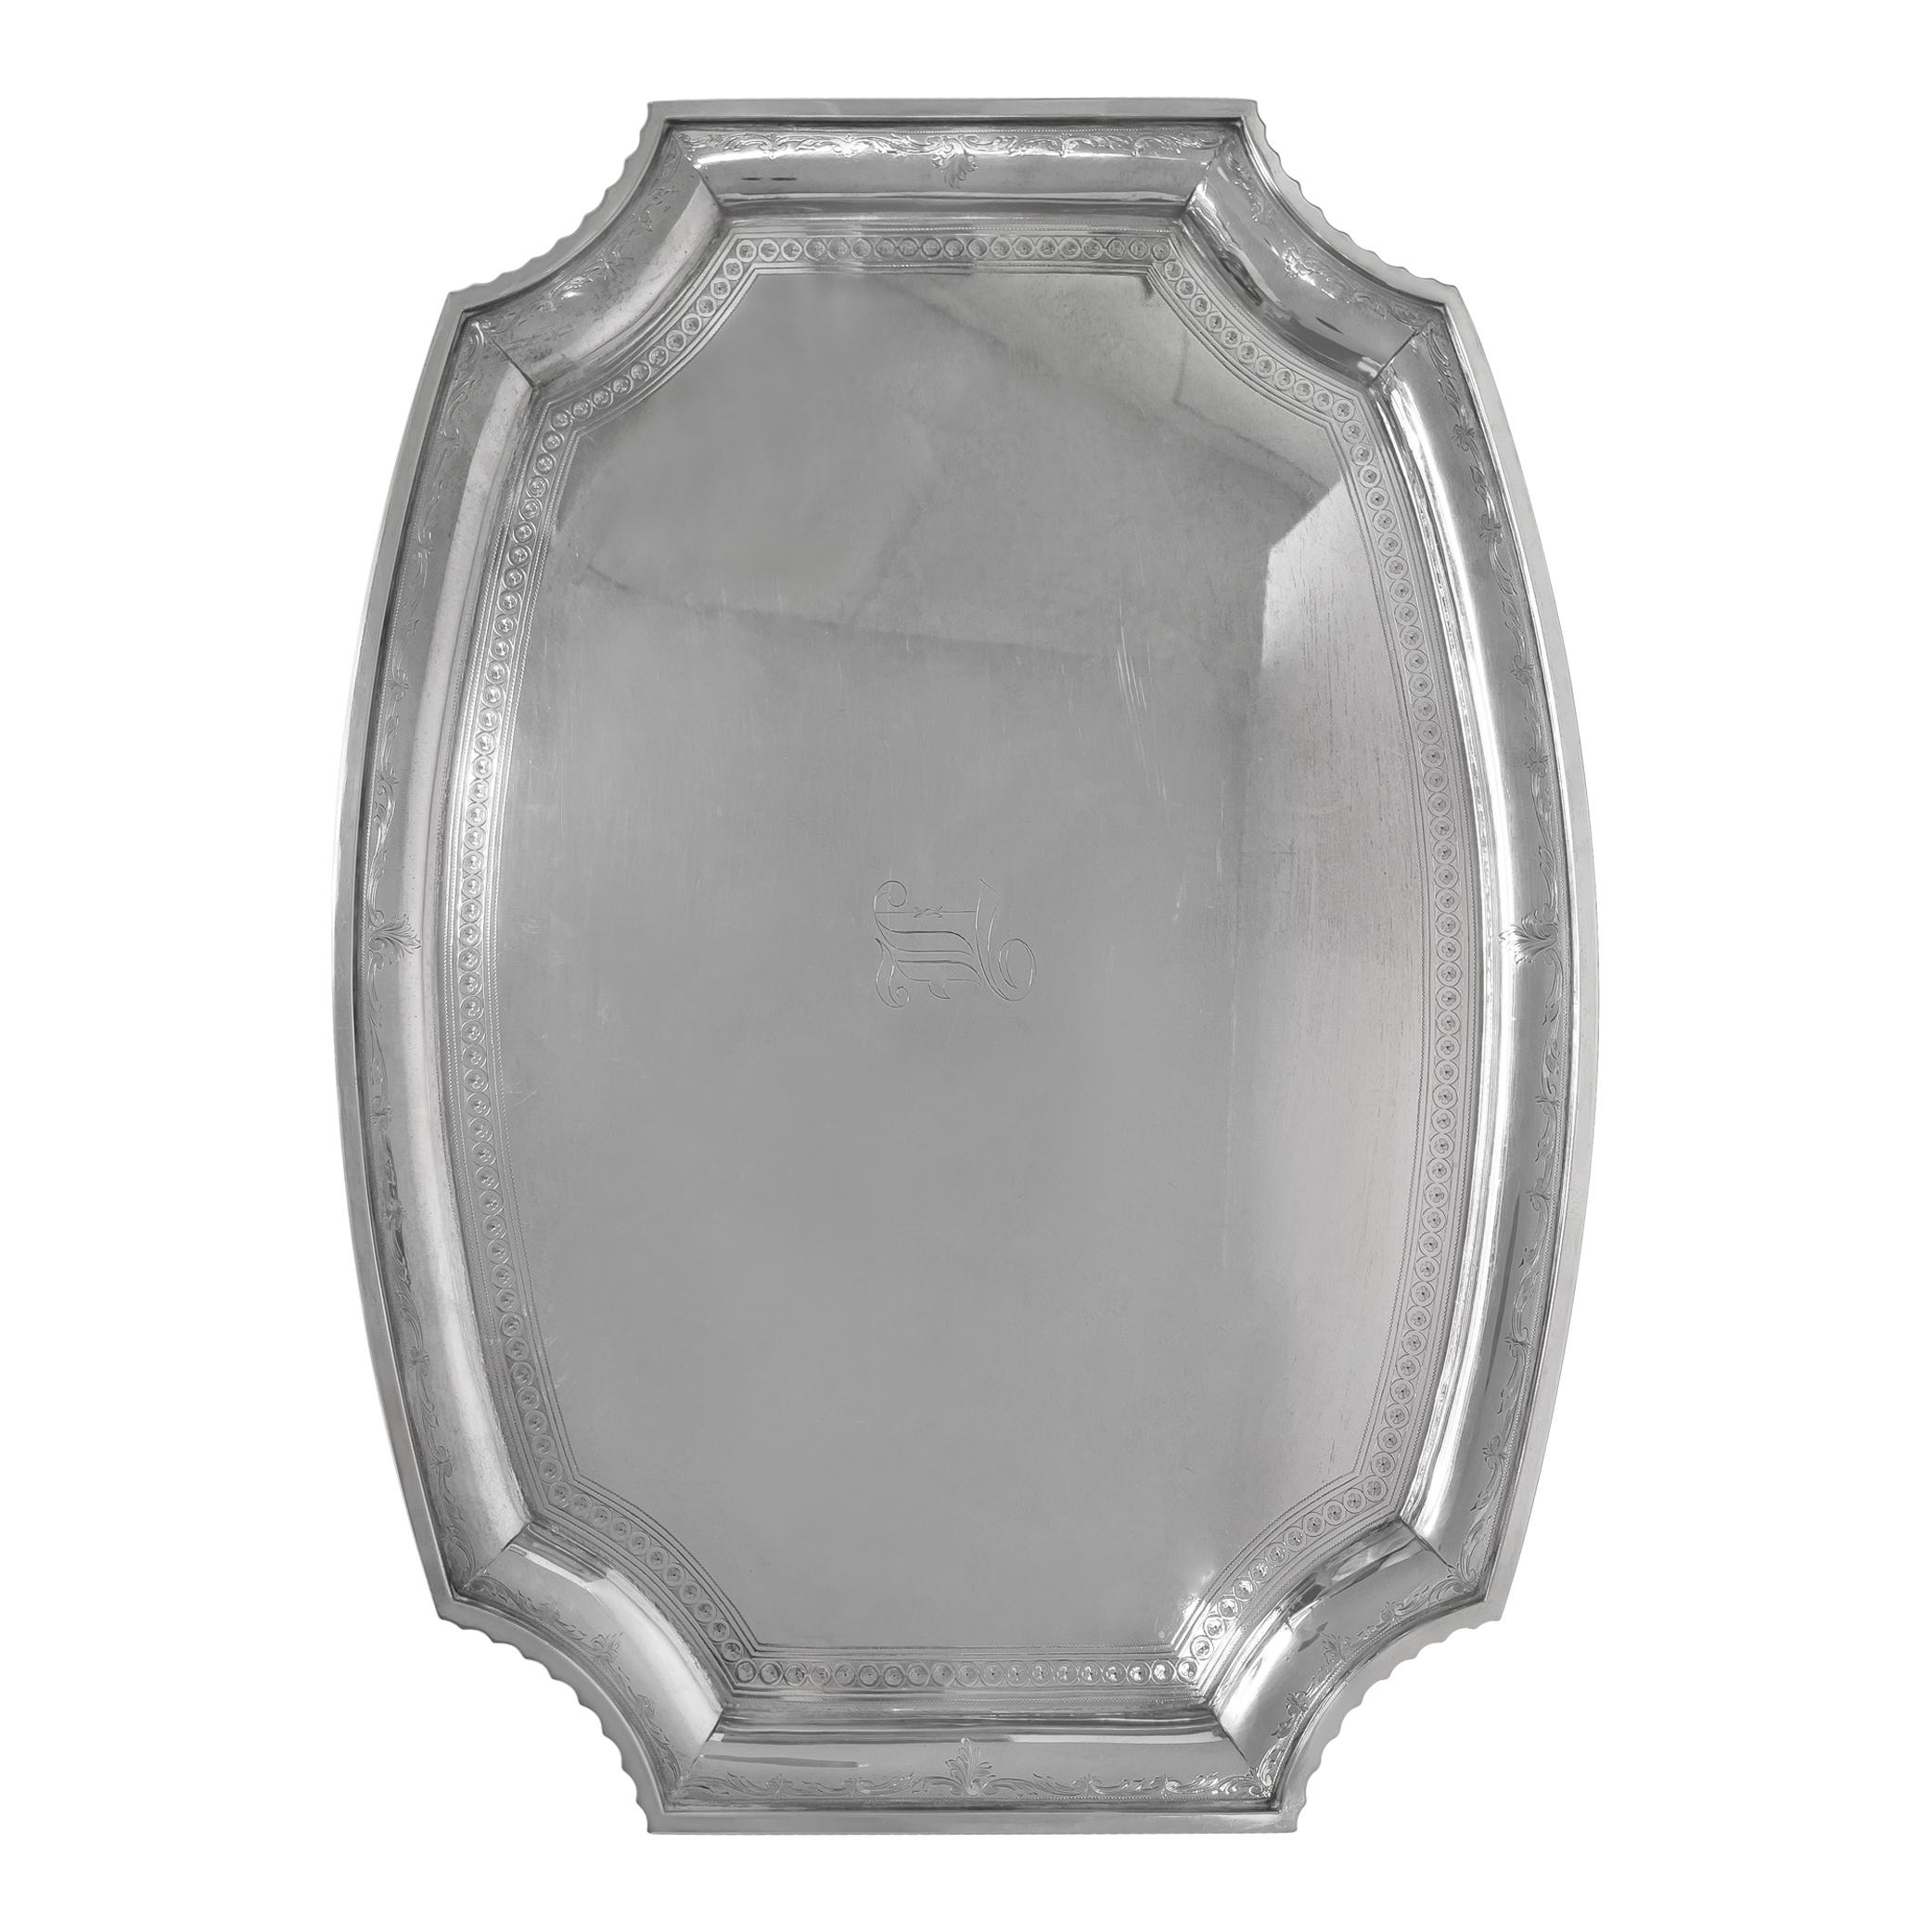 Large & Heavy Sterling SIlver tray by Gorham. Over 102.00 troy ounces of .925 sterling silver. 